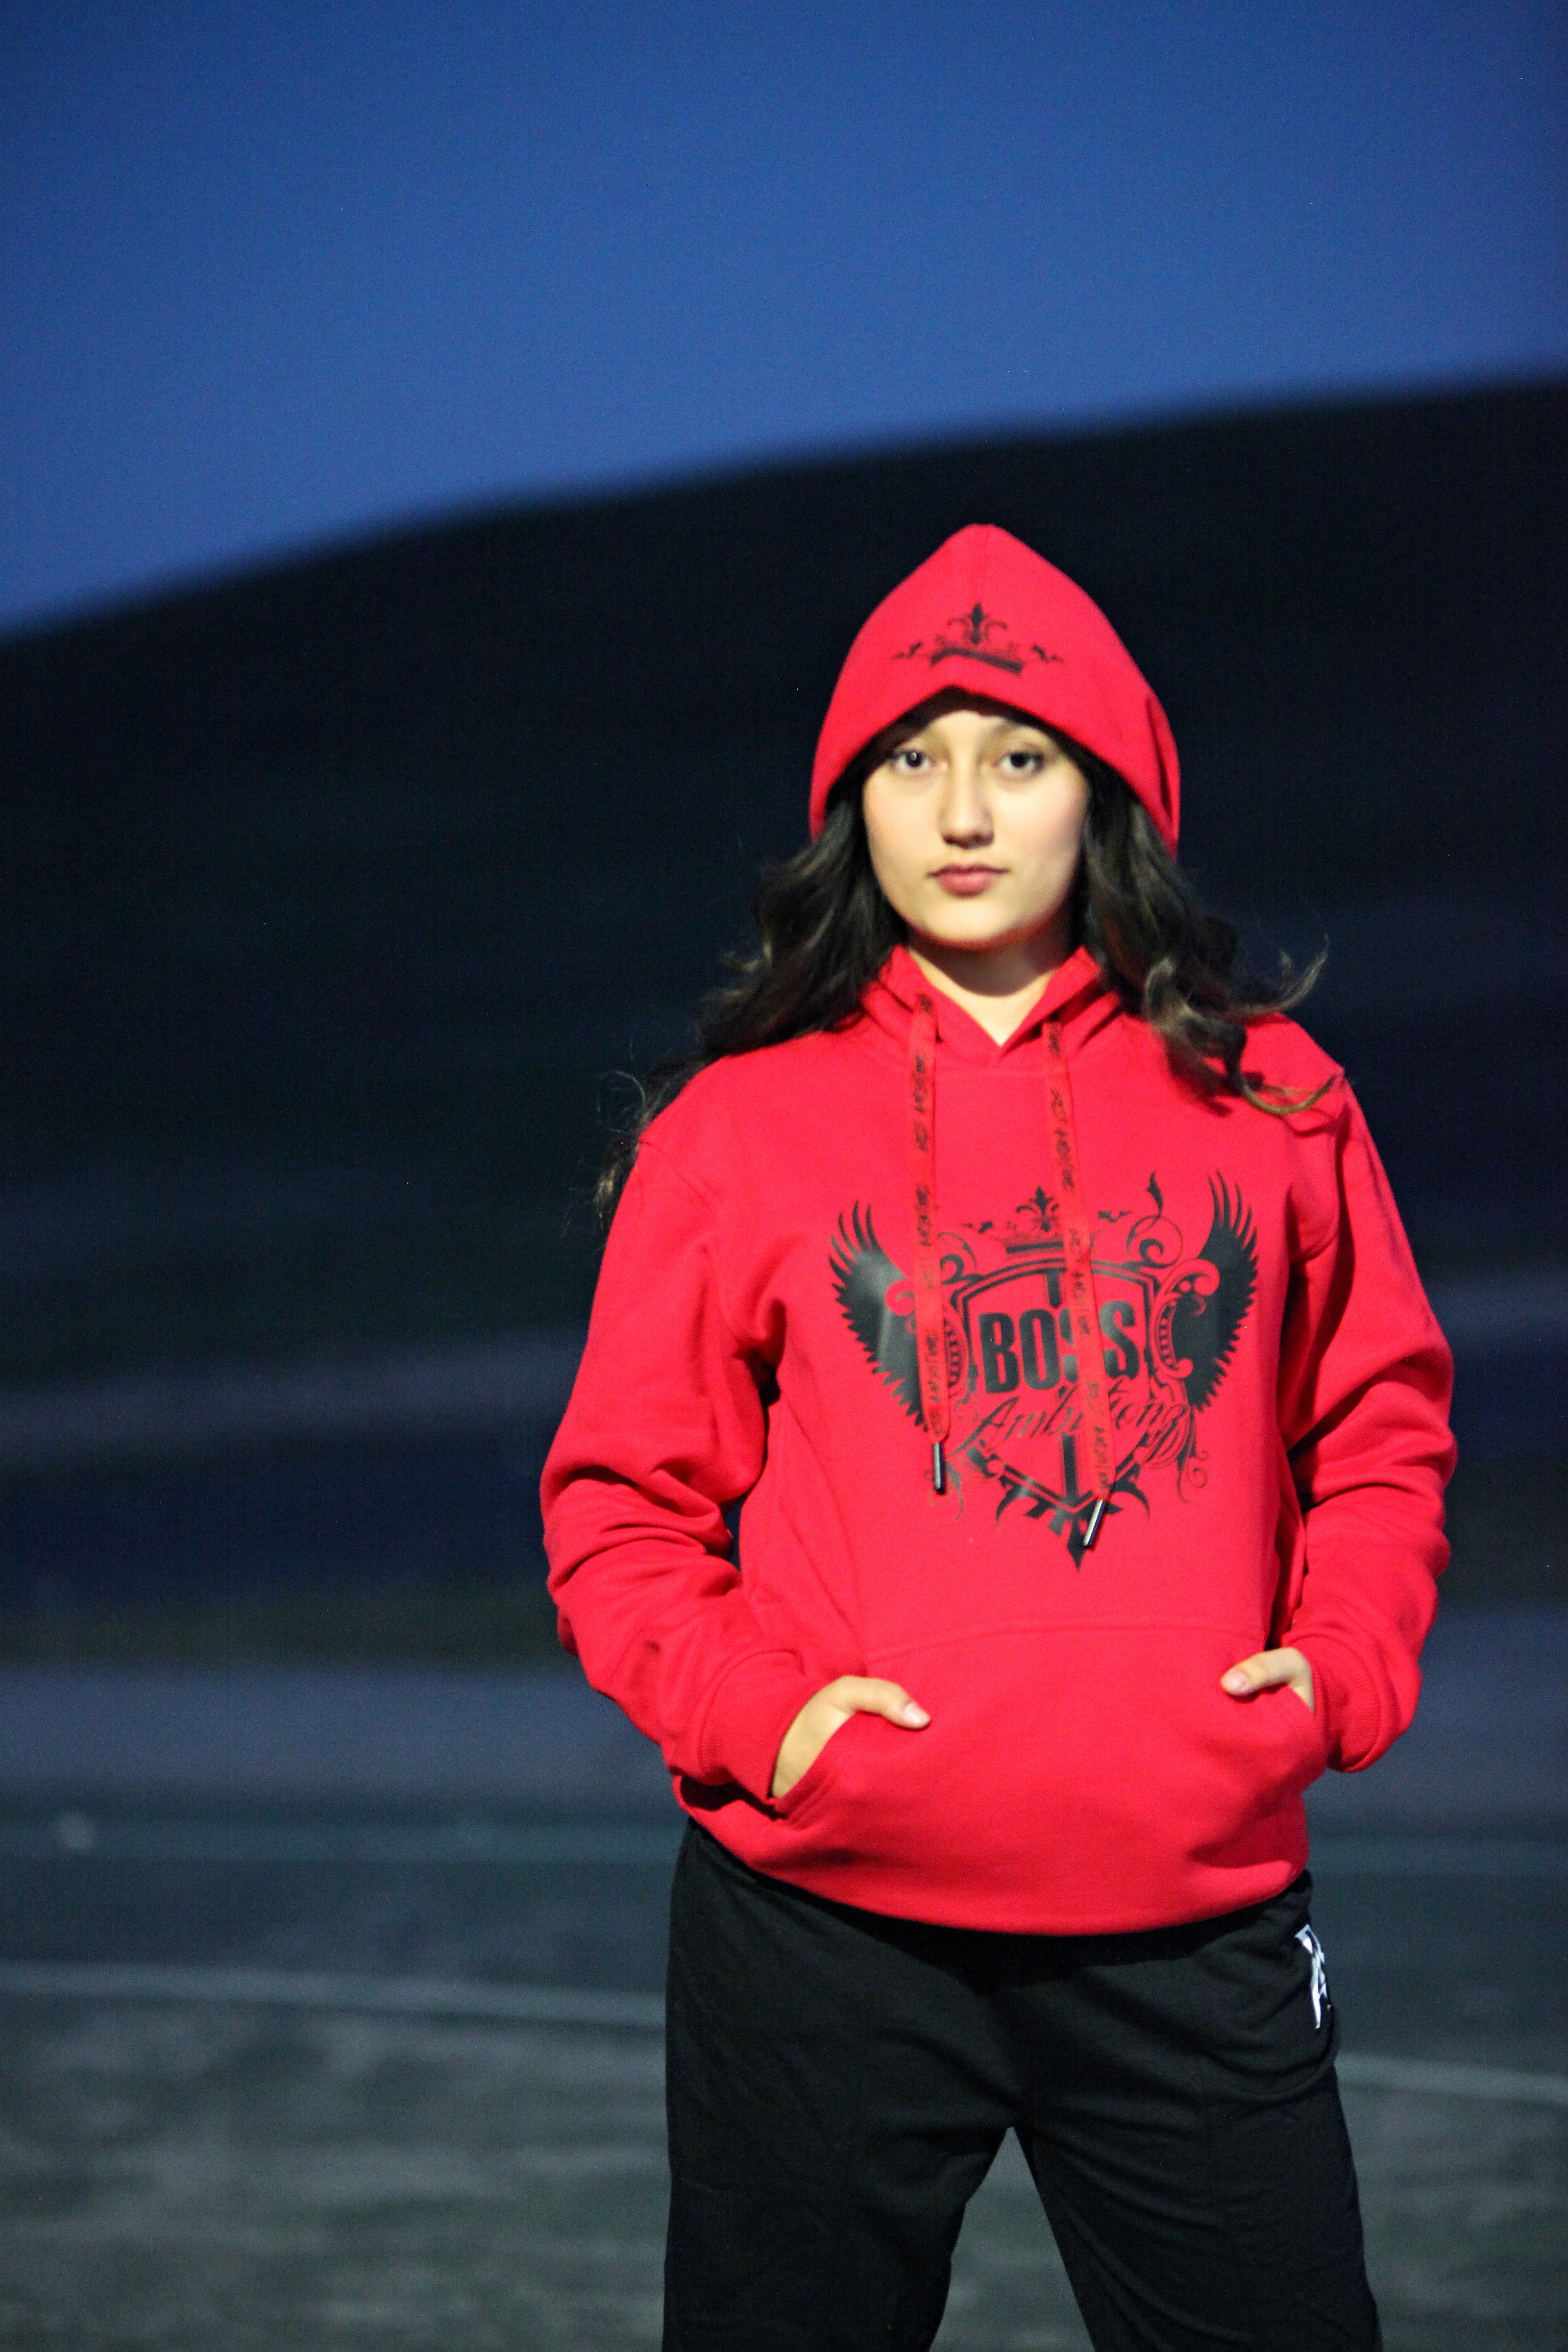 Miss Junior Teen USA models the Ambition Crown Radiance Reflective Hoodie in red, with the hood up, showcasing the reflective logo and confident stance.